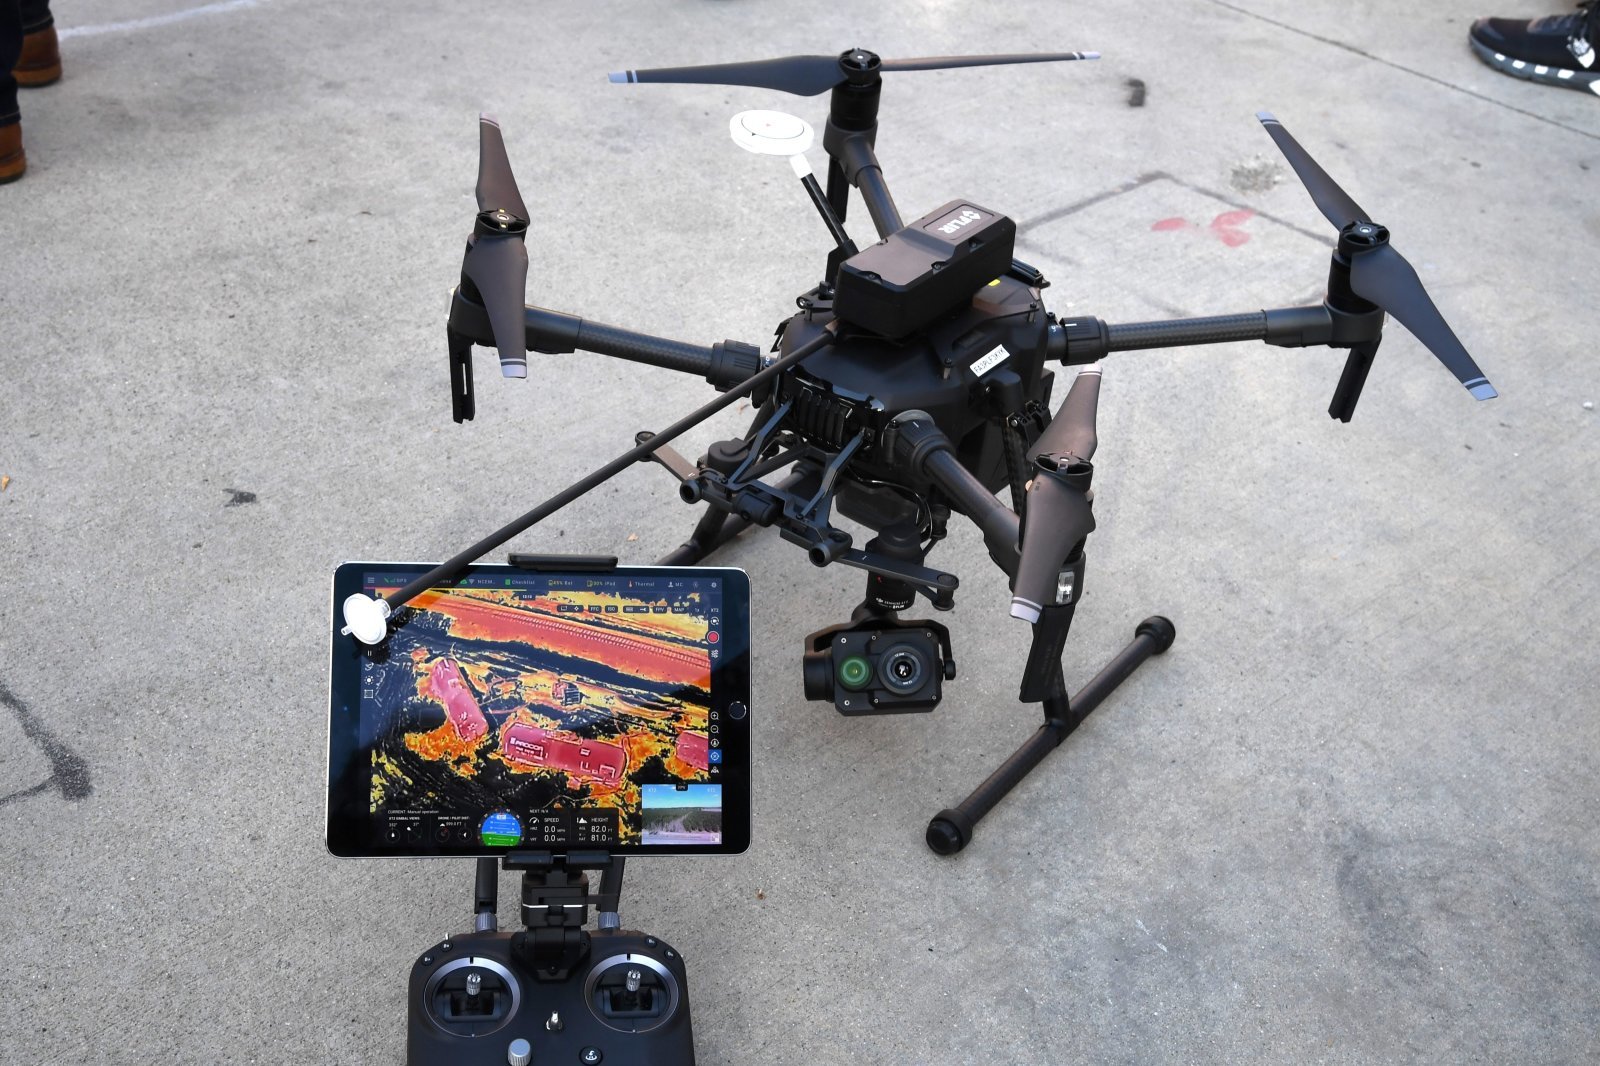 The new FLIR C360 Muve gas detector is seen on a DJI Matrice 210 drone, during a demonstration at the Los Angeles Fire Department ahead of DJI's AirWorks conference in Los Angeles, California, on September 23, 2019. - Drones are proving to be a game changer for emergency responders who are increasingly using the technology to spot fires, detect toxic gas or to locate missing people or suspects, experts say.
"Where we cannot go, we will now be putting a unmanned aircraft system (UAS), where we can't see we can now put a UAS," Richard Fields, battalion chief with the Los Angeles Fire Department, told AFP at a conference on drones this week in Los Angeles. (Photo by Robyn Beck / AFP)        (Photo credit should read ROBYN BECK/AFP/Getty Images)